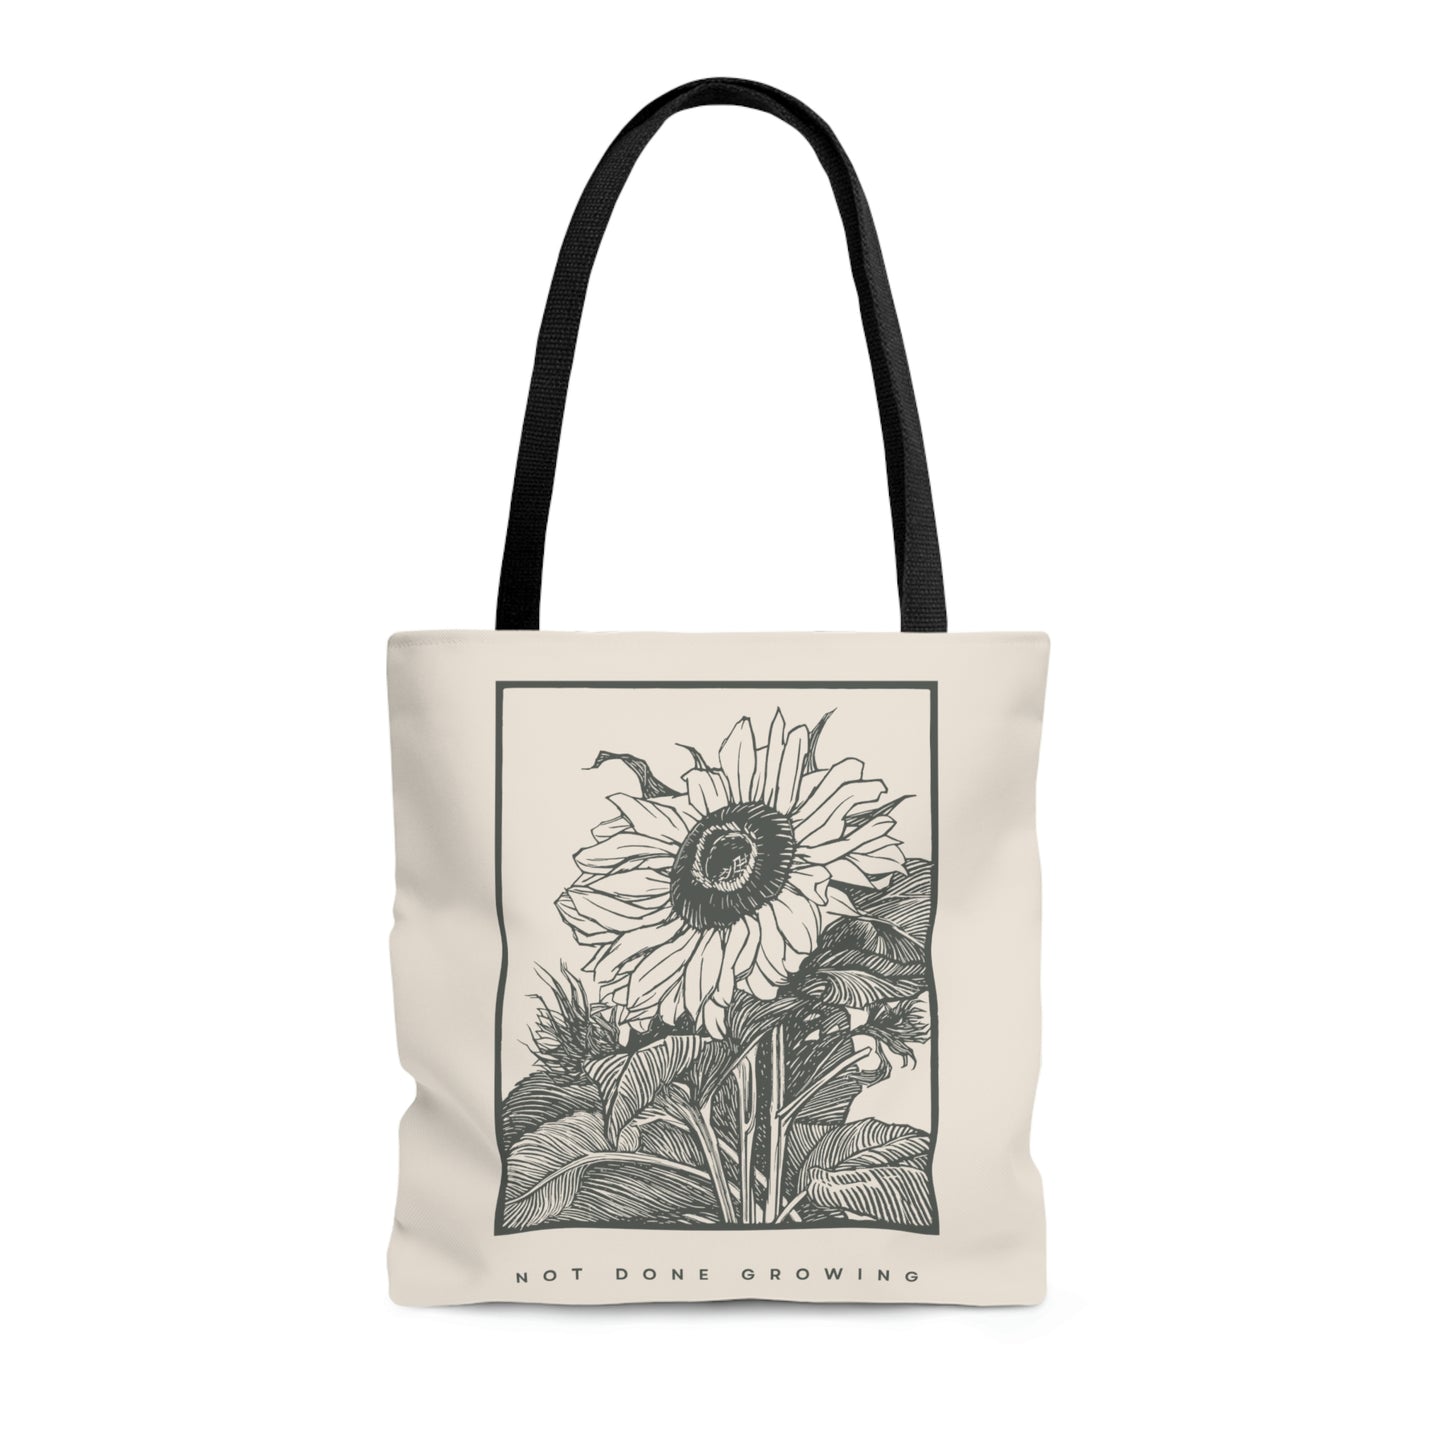 Not Done Growing Tote Bag